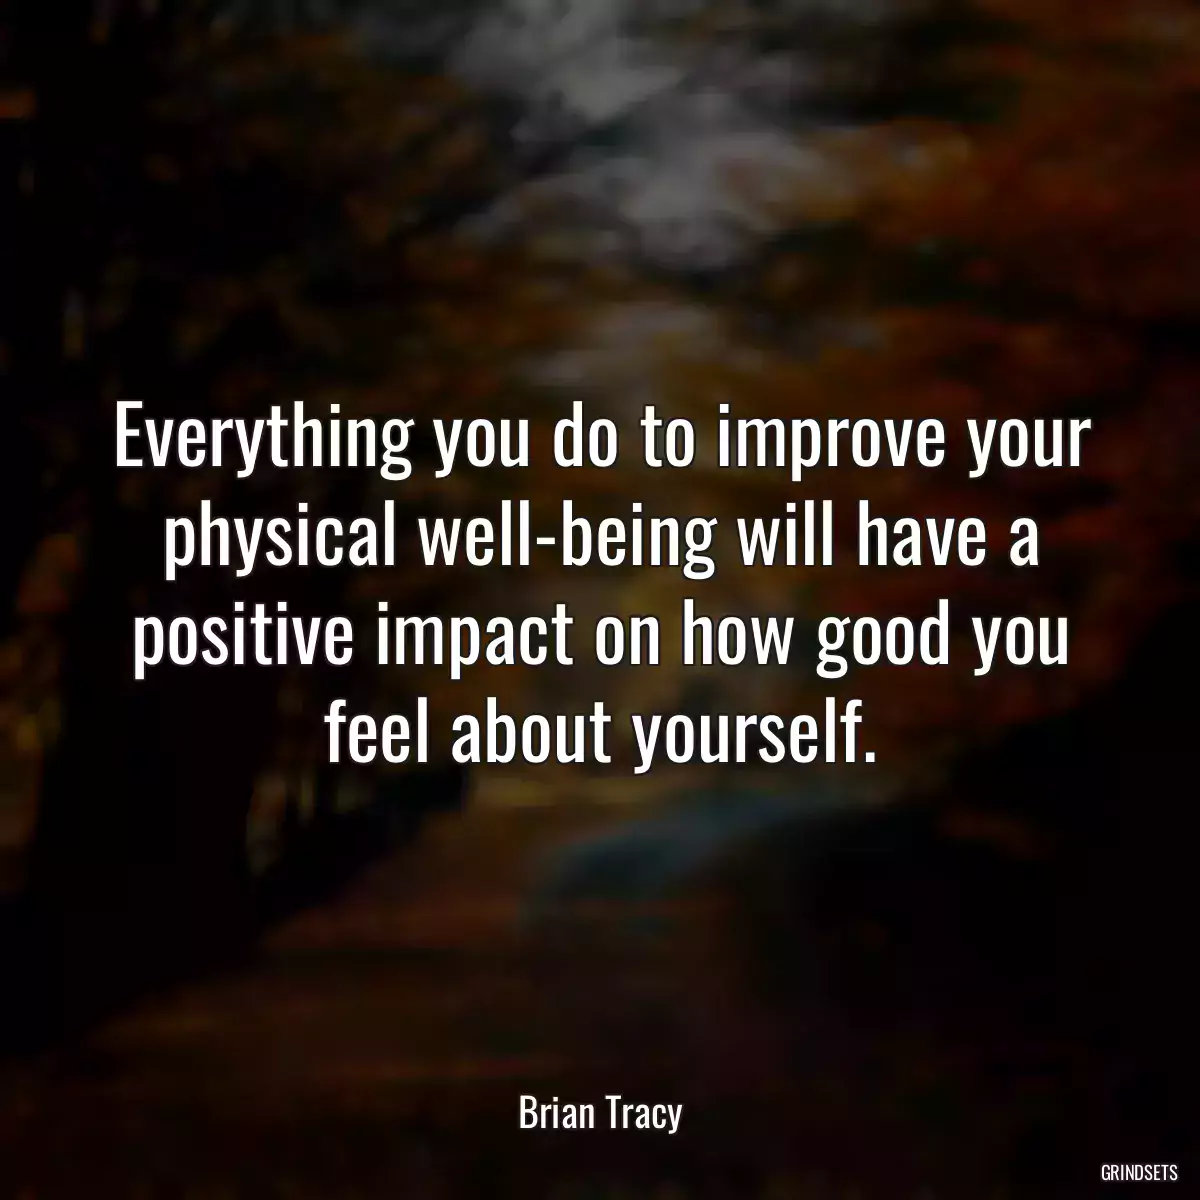 Everything you do to improve your physical well-being will have a positive impact on how good you feel about yourself.